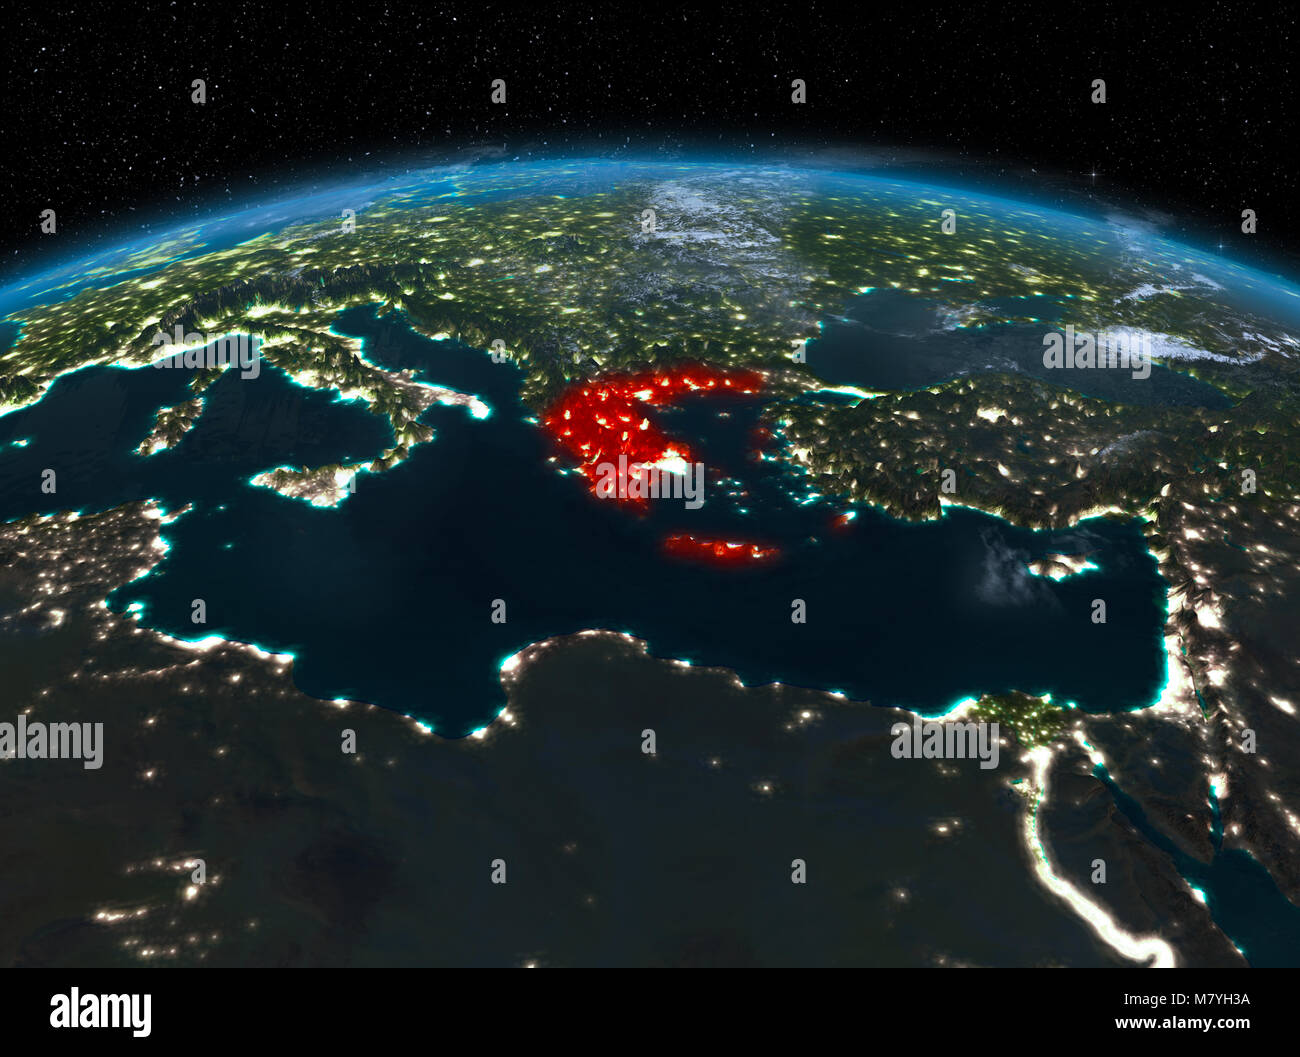 Satellite Night View Of Greece Highlighted In Red On Planet Earth